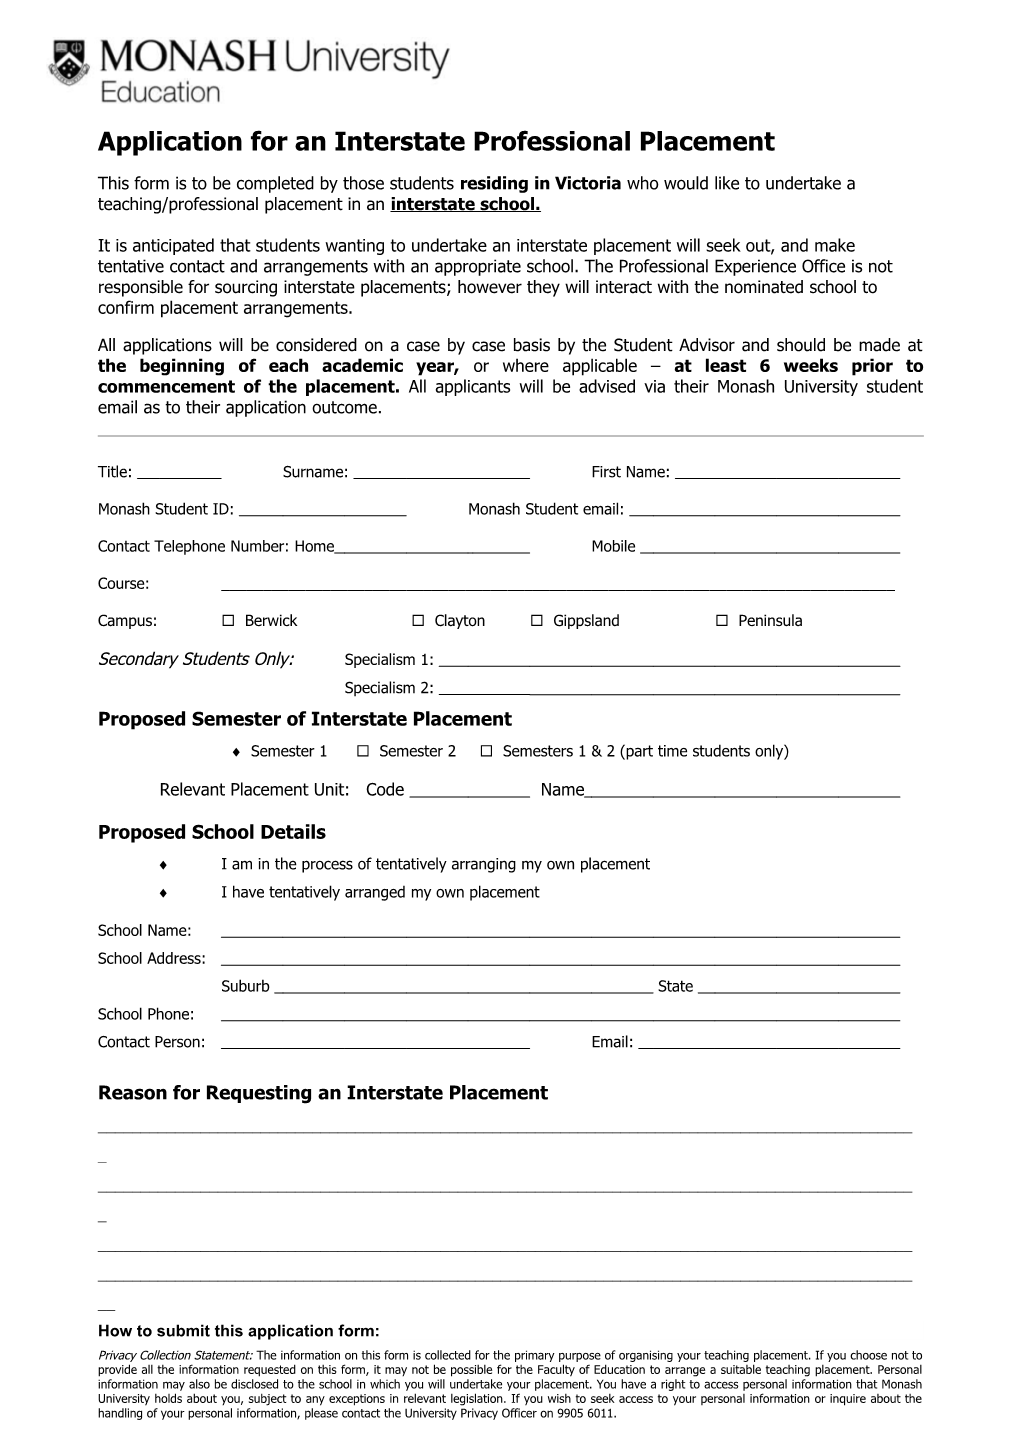 Application for an Interstate Professional Placement